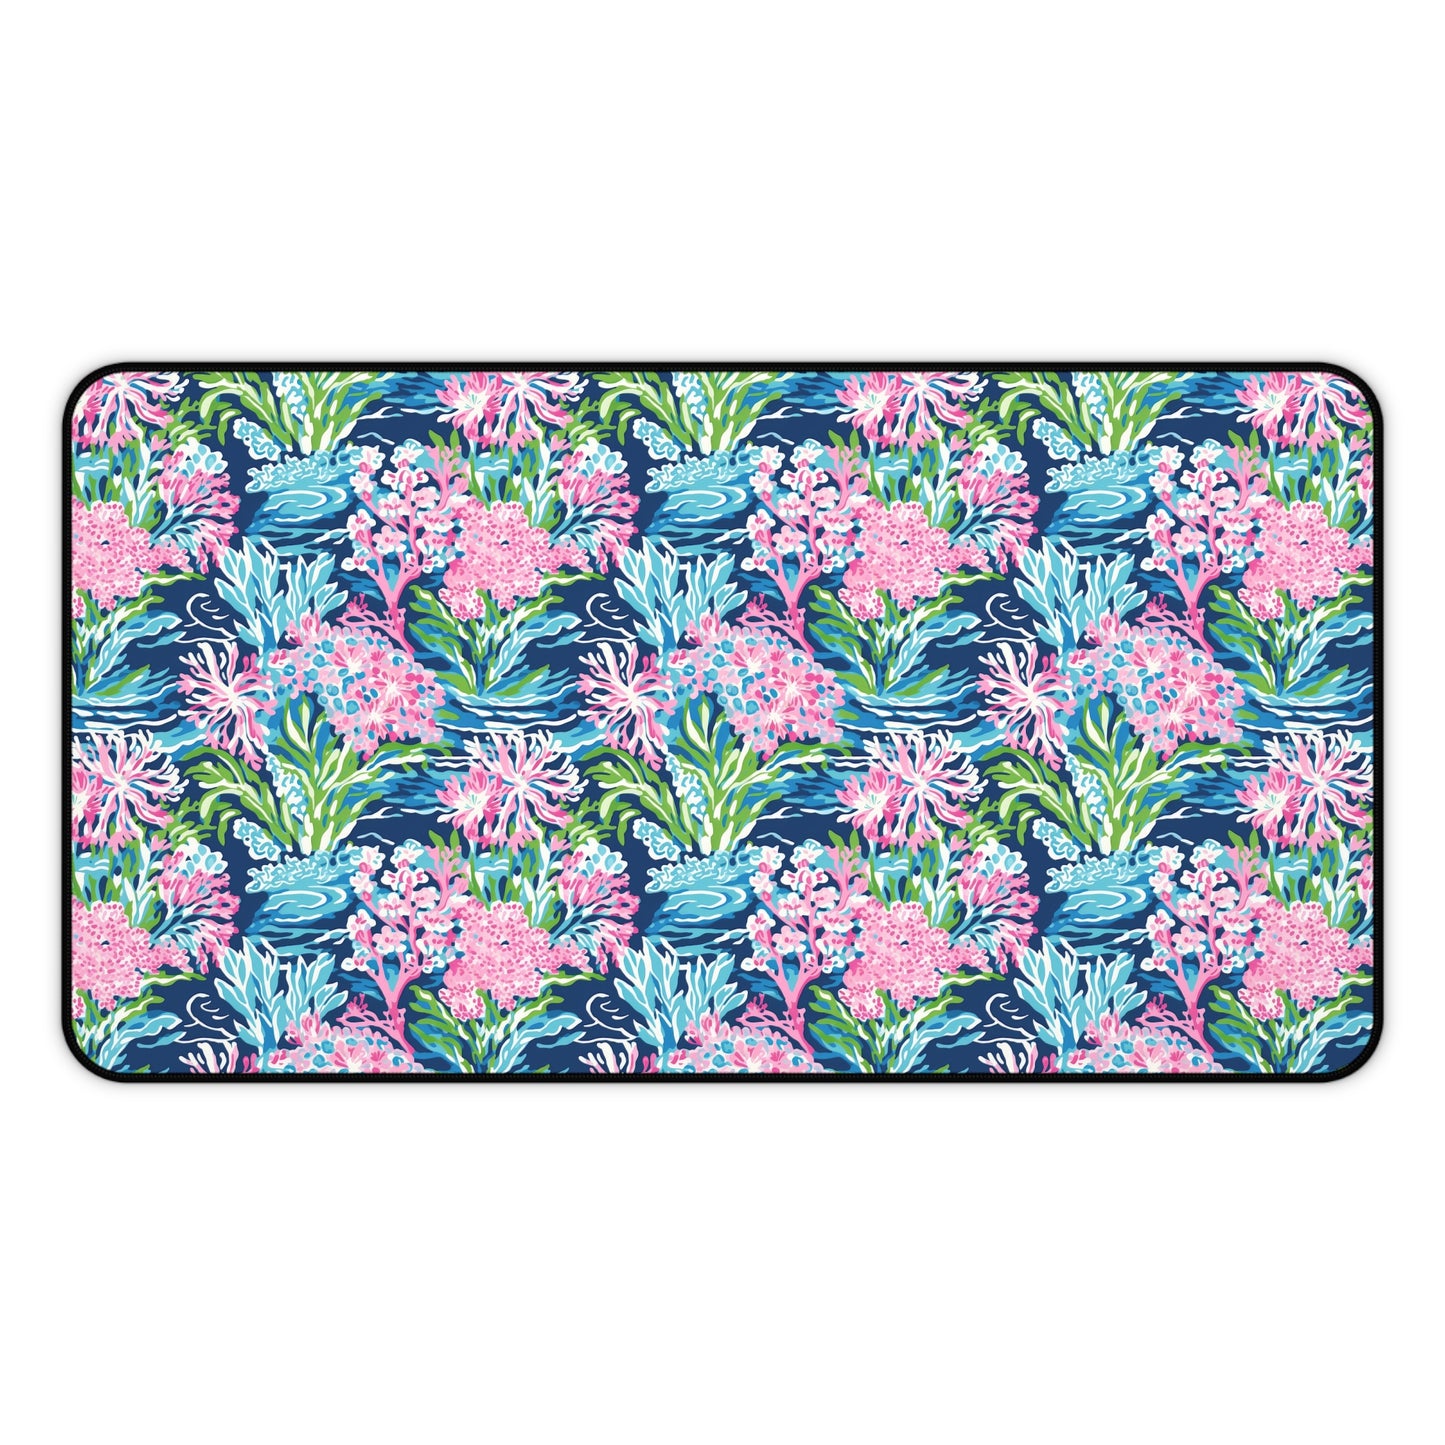 Blush Blossoms: Watercolor Water Garden Adorned with Pink Flowers Desk Mat Extended Gaming Mouse Pad - 3 Sizes